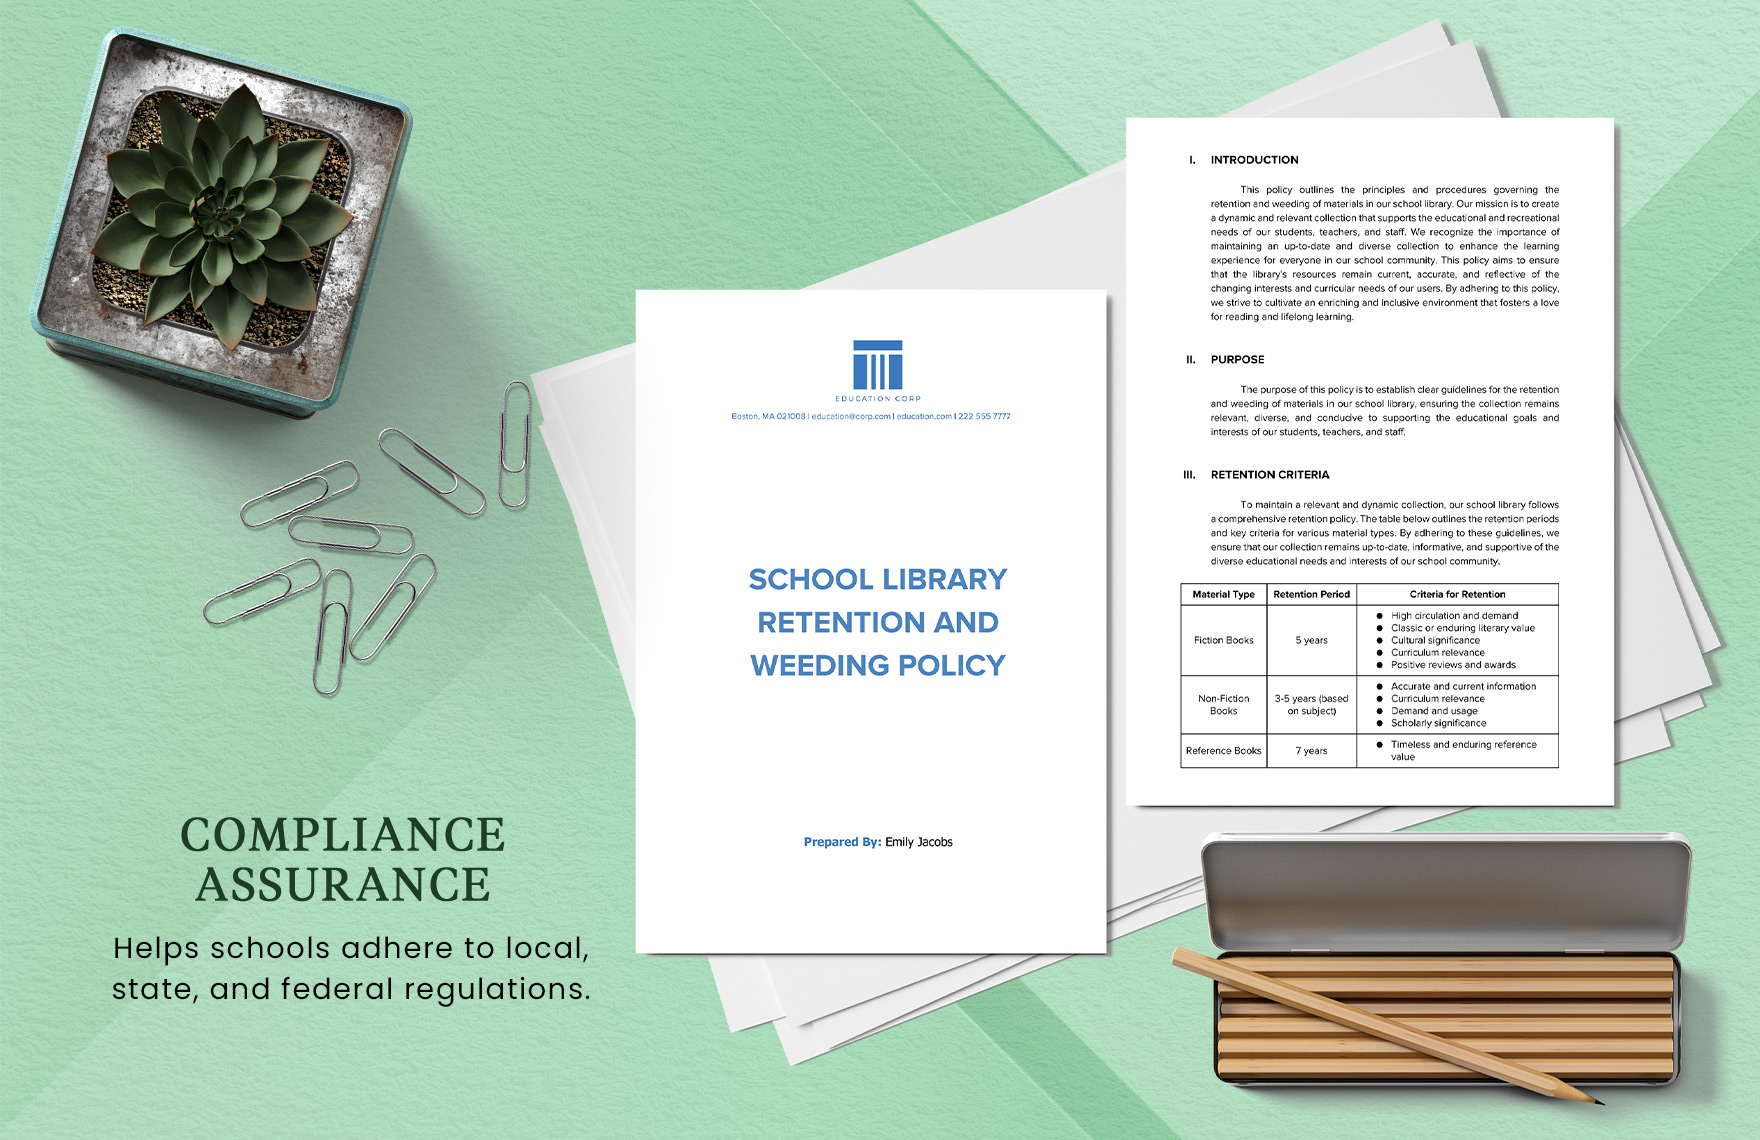 School Library Retention and Weeding Policy Template